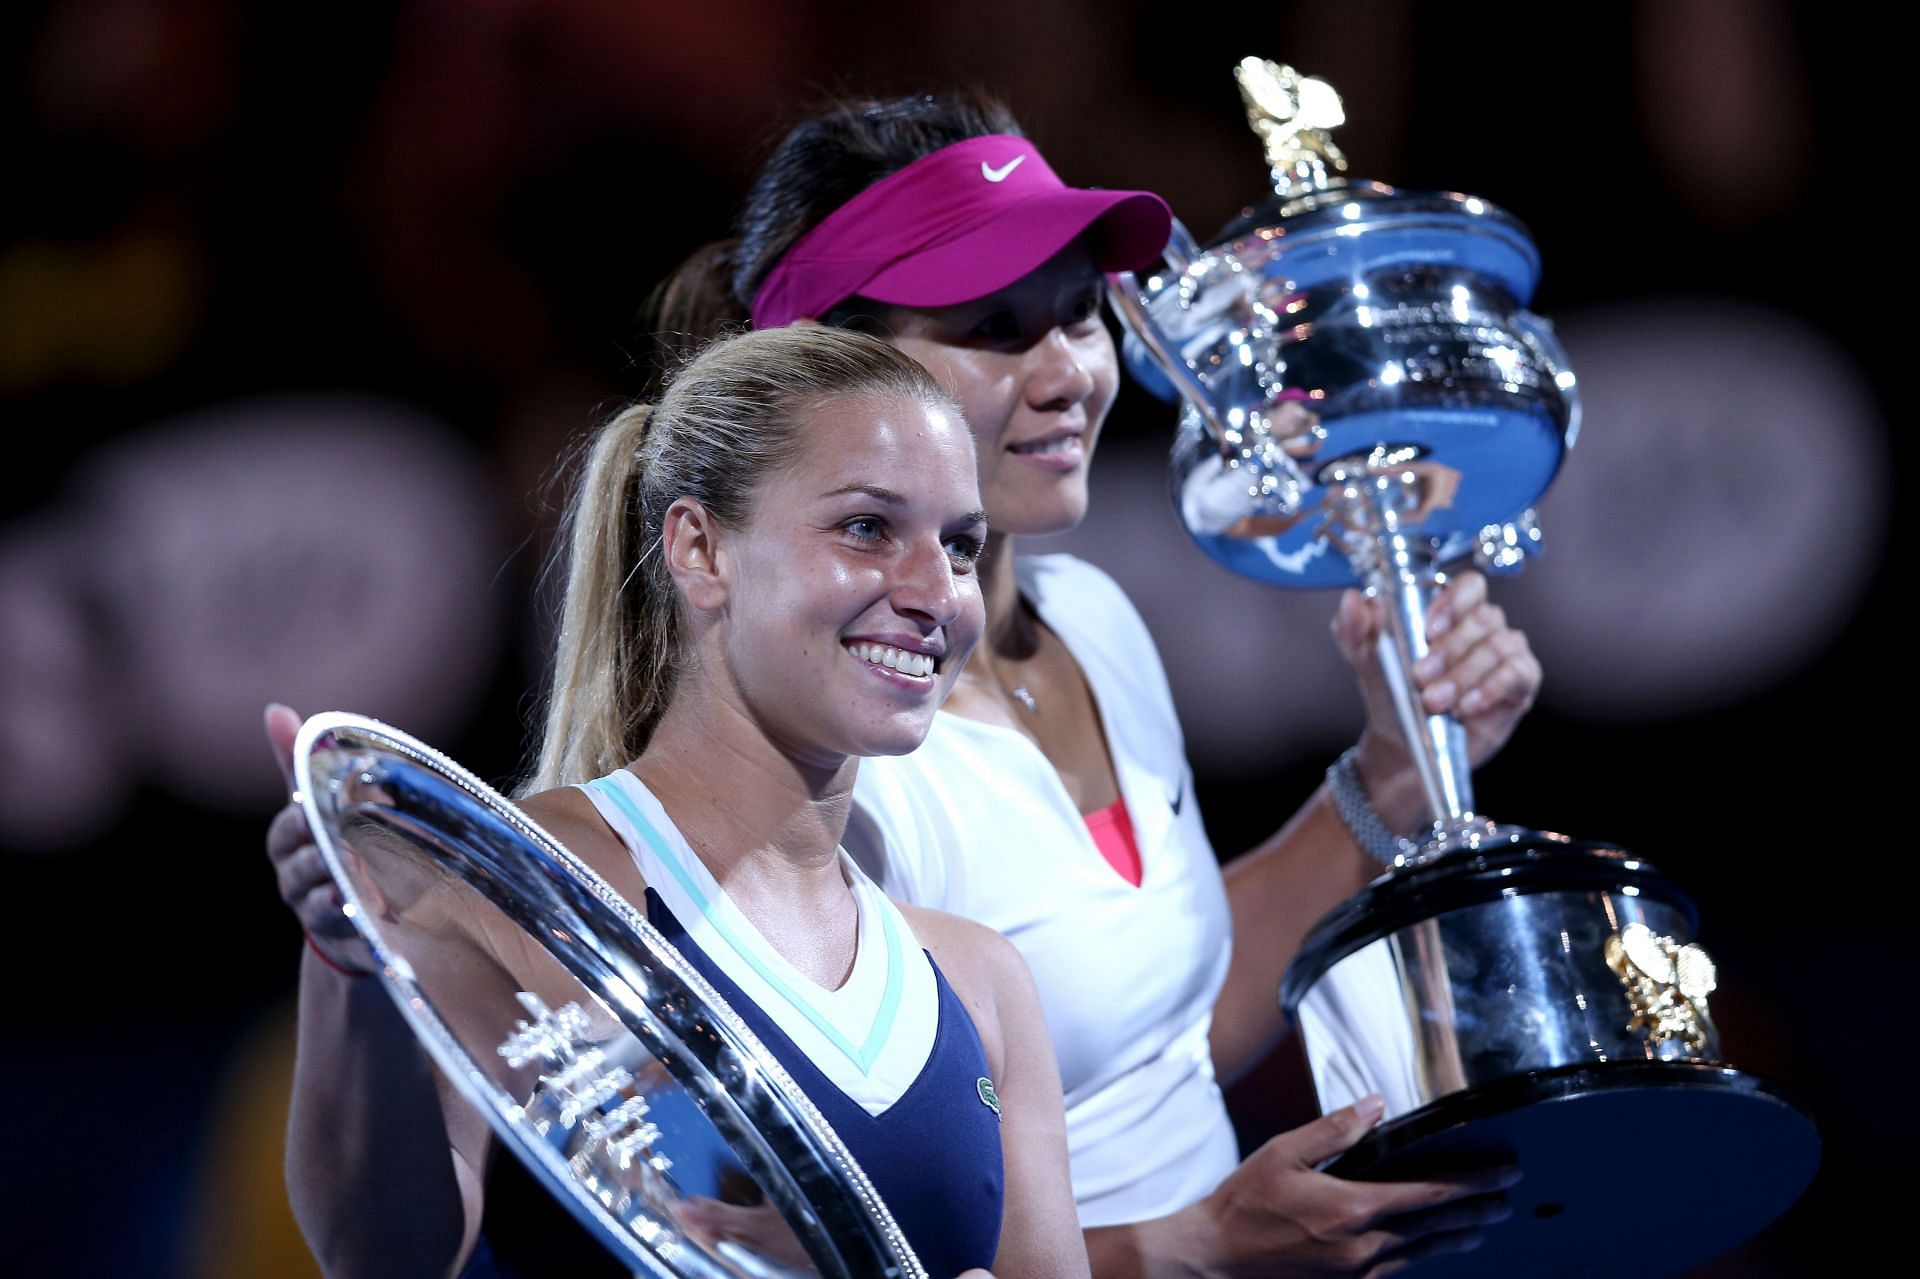 Cibulkova launched her line shortly after the 2014 Australian Open.